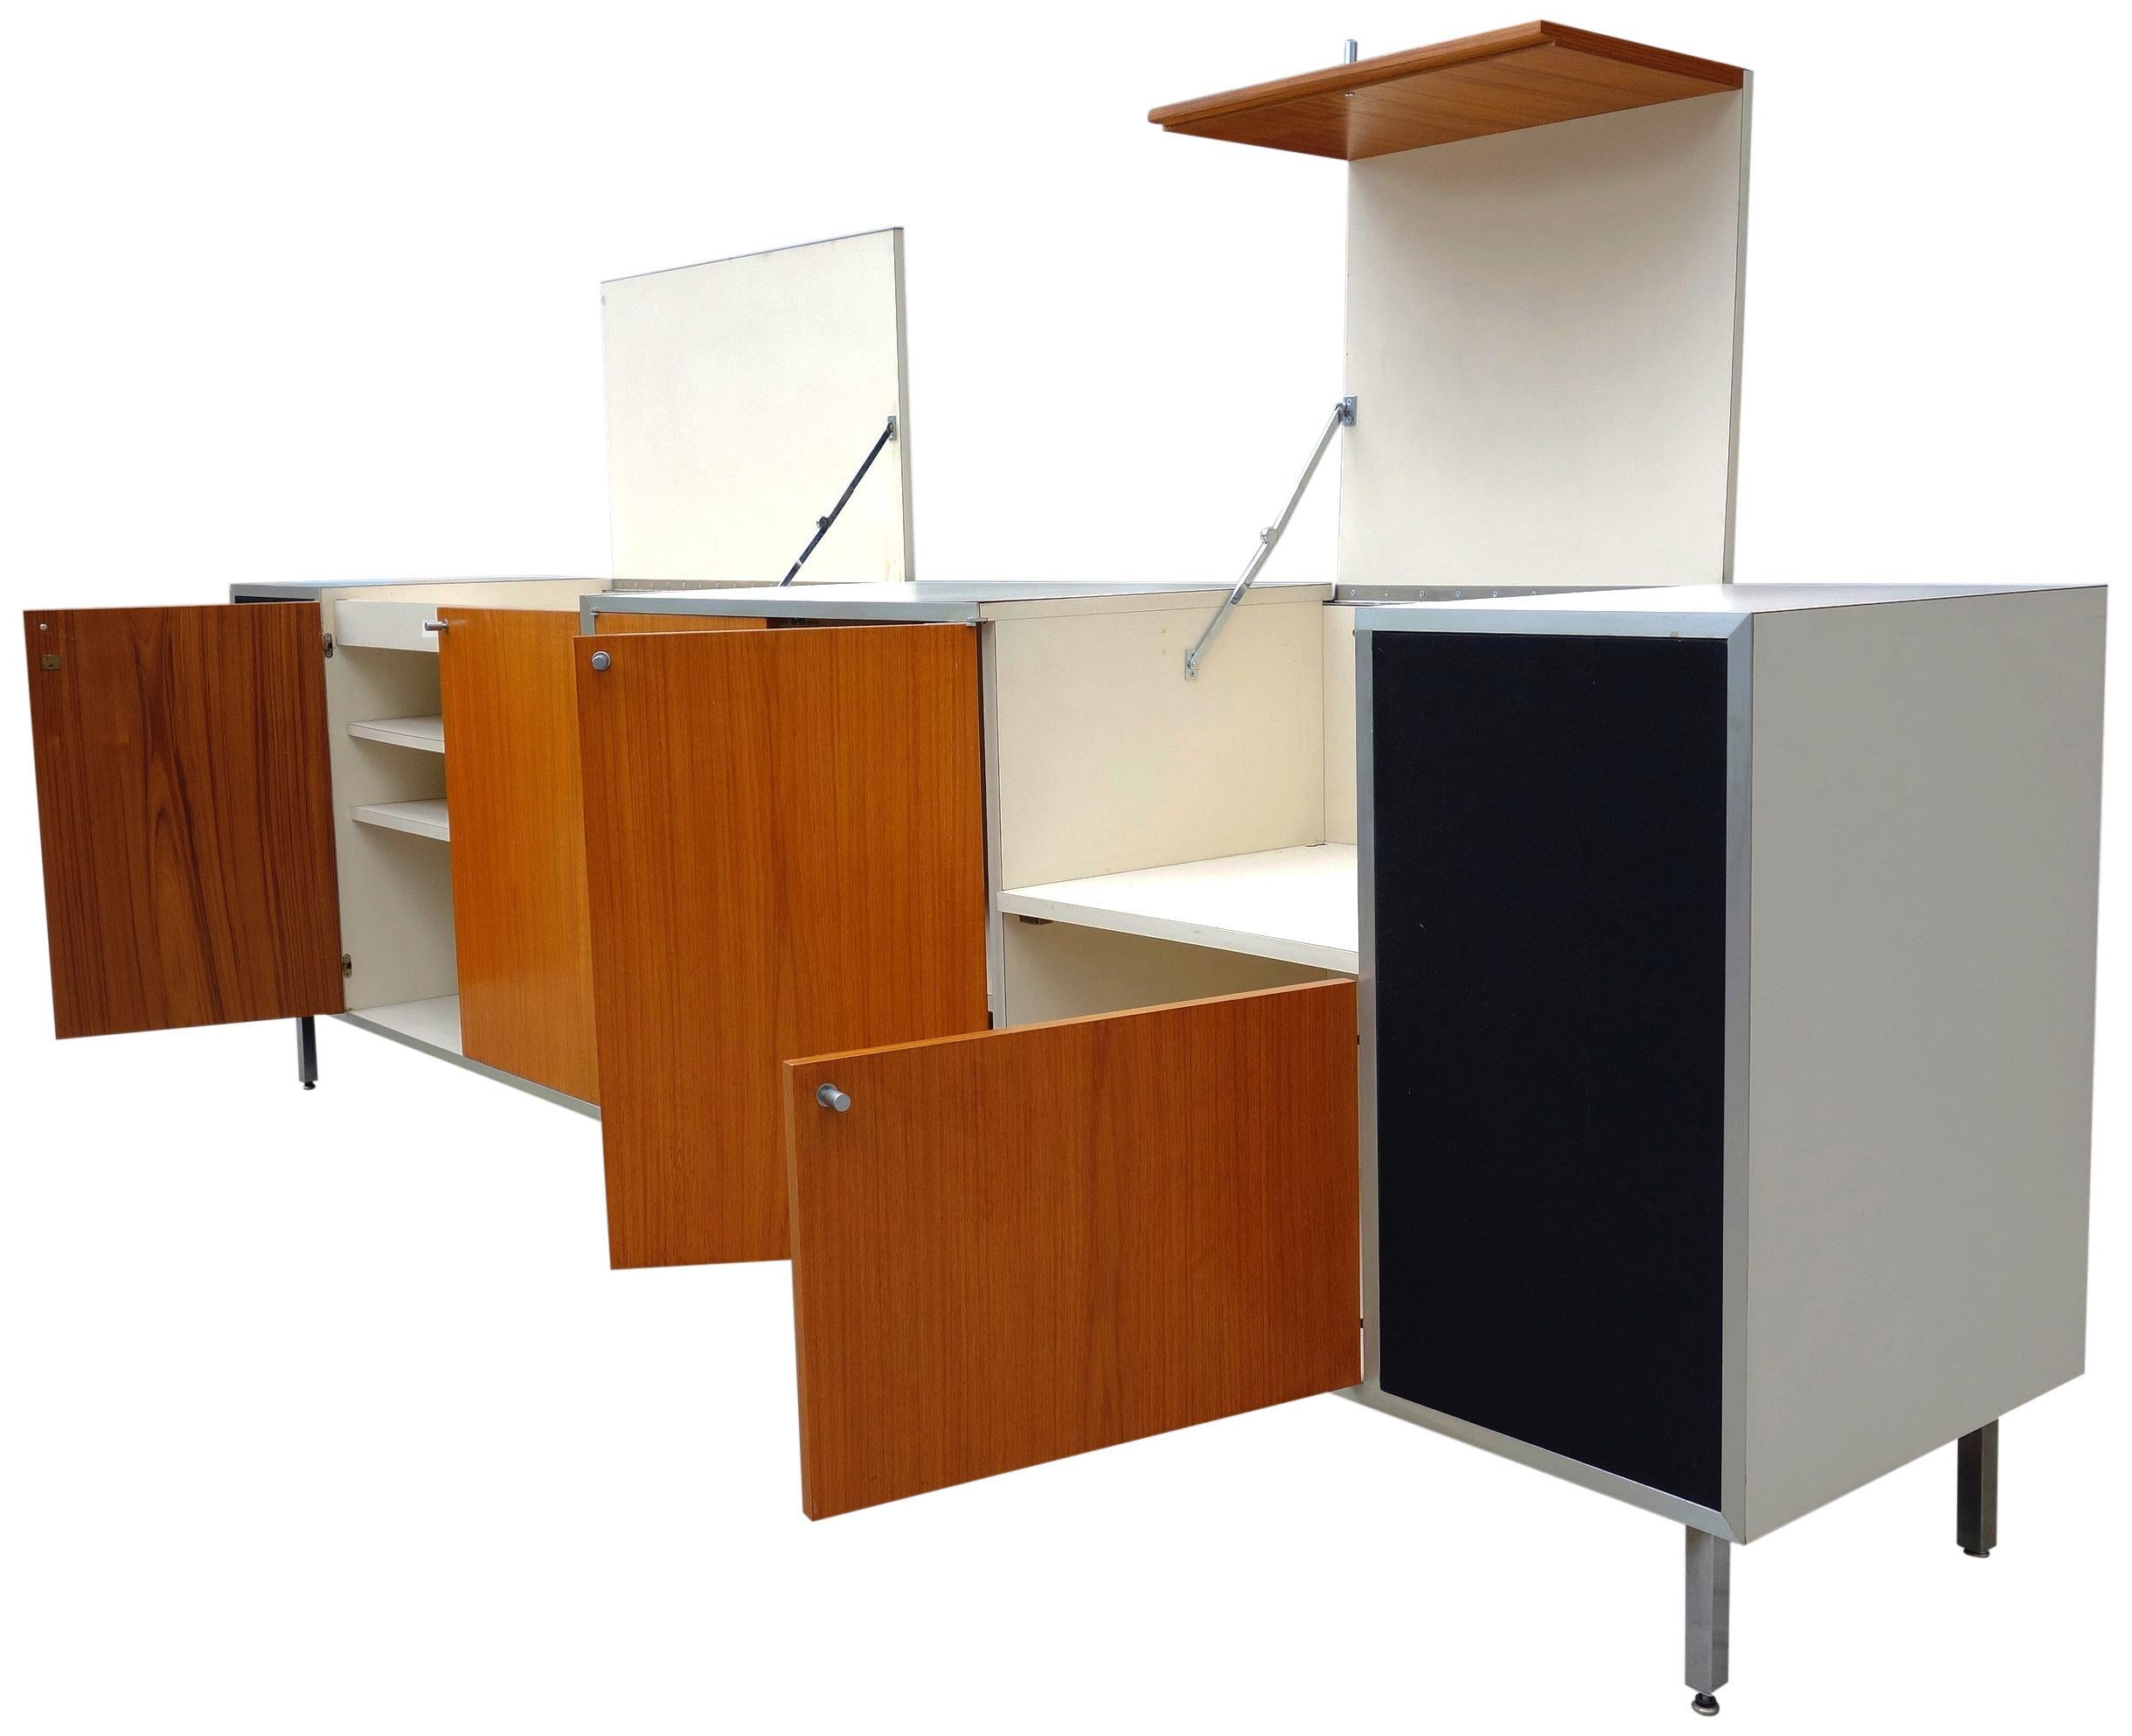 For your consideration is this wonderful and substantial entertainment credenza featuring space for all your sound gear and room for a bar. Both ends of the unit provide room for your speakers. A great addition for an audiophile! Dating from the